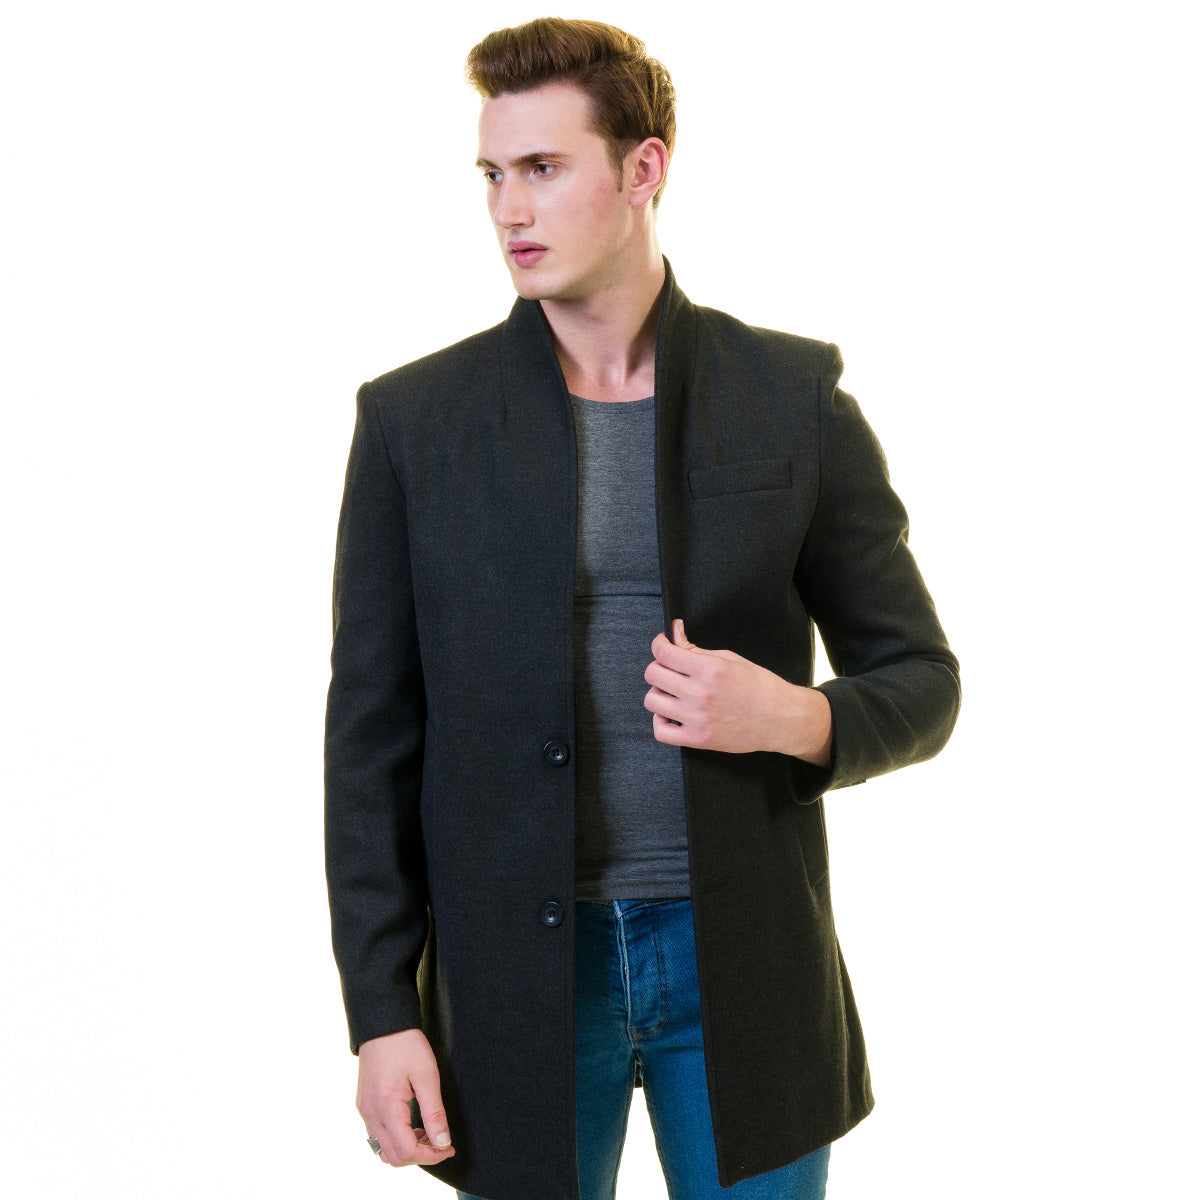 Men's European Balck Wool Coat Jacket Tailor fit Fine Luxury Quality Work and Casual